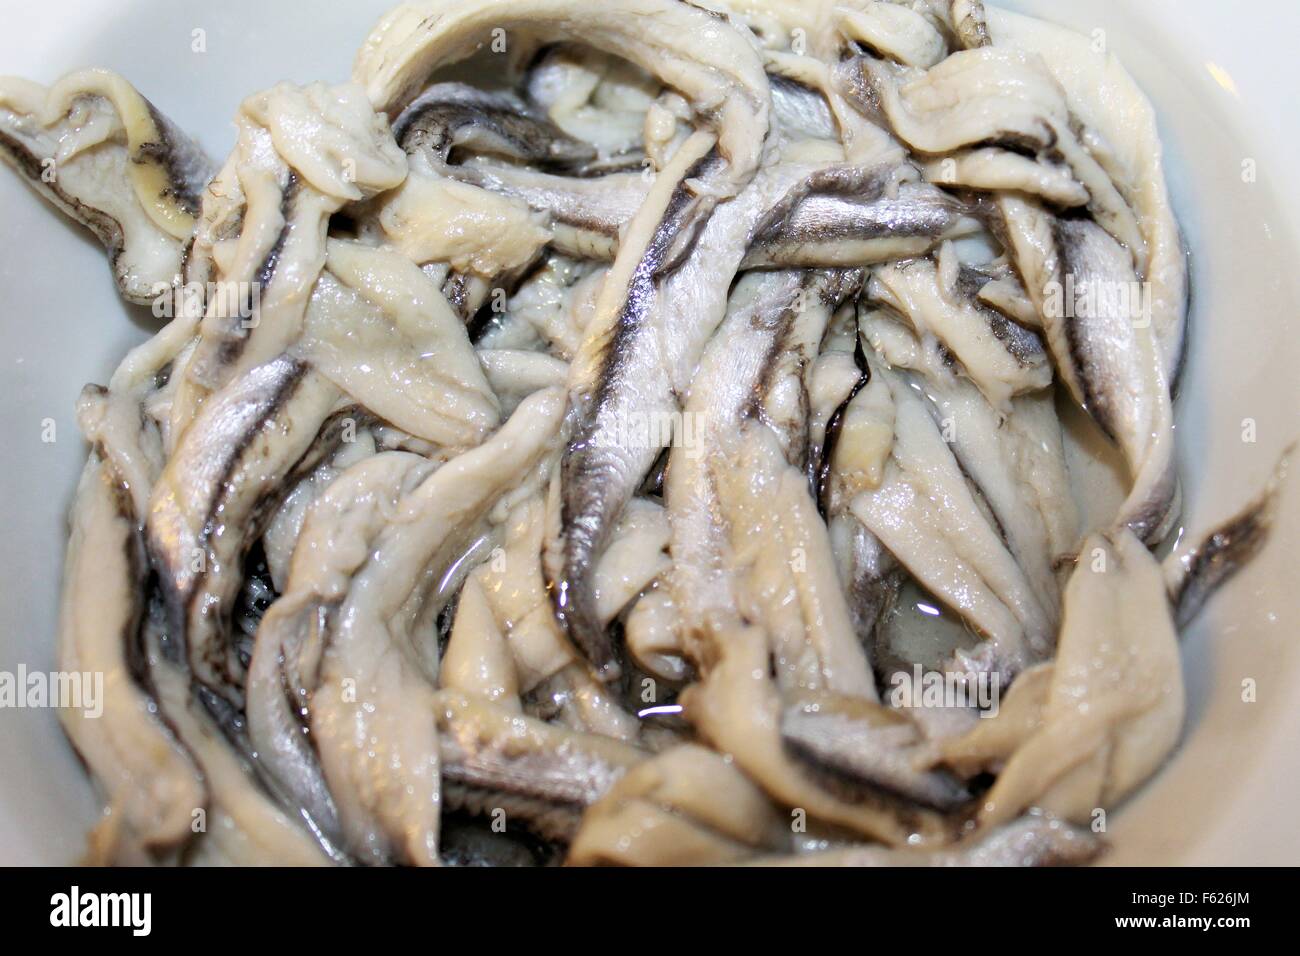 anchovy fillets marinated in small bowl Stock Photo